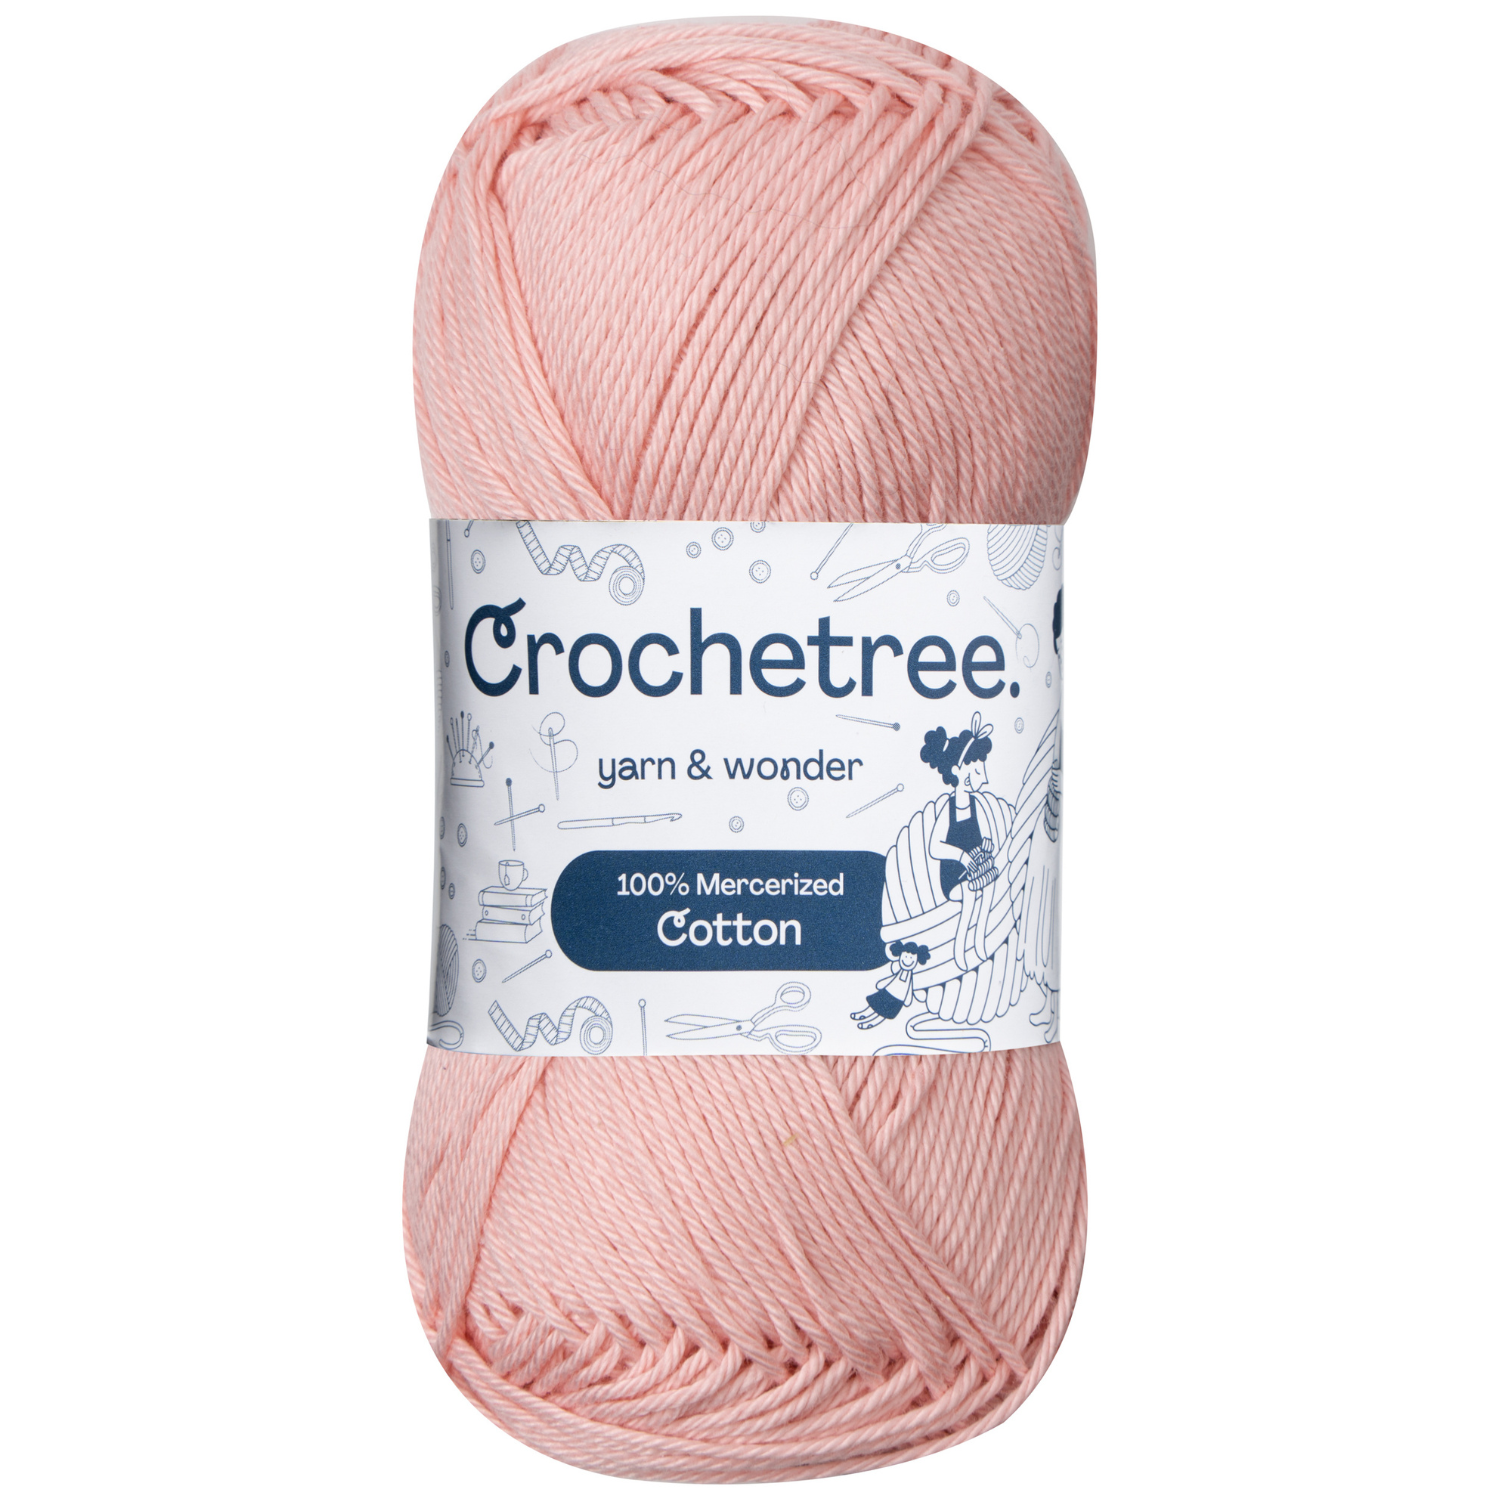 Mint color 100% mercerised cotton yarn - for making small projects like  crocheting toy amigurumi – Yarn Home